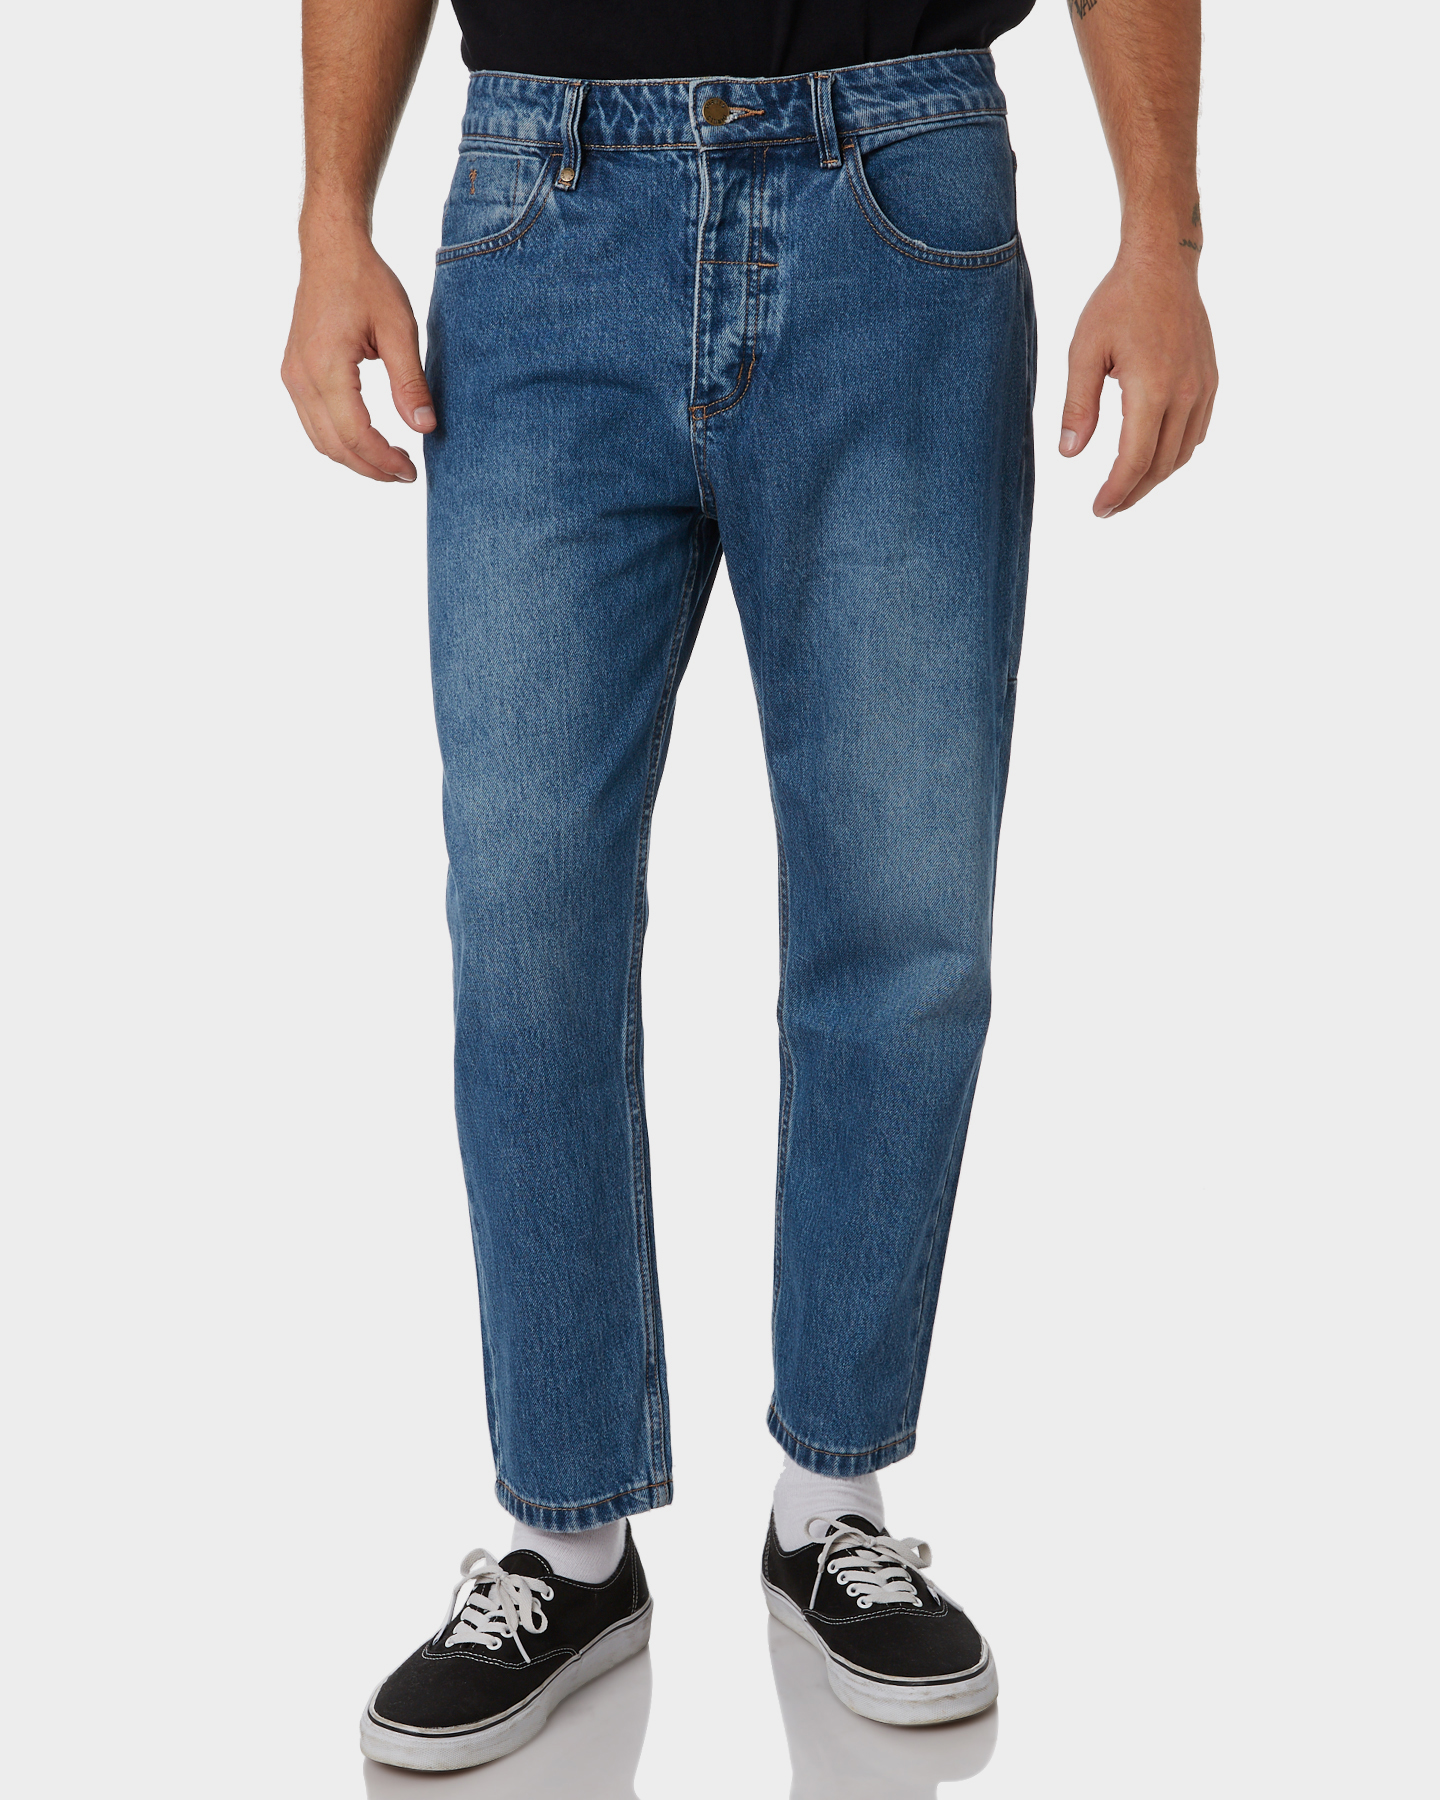 Thrills Chopped Mens Jean - Rinsed Blues | SurfStitch